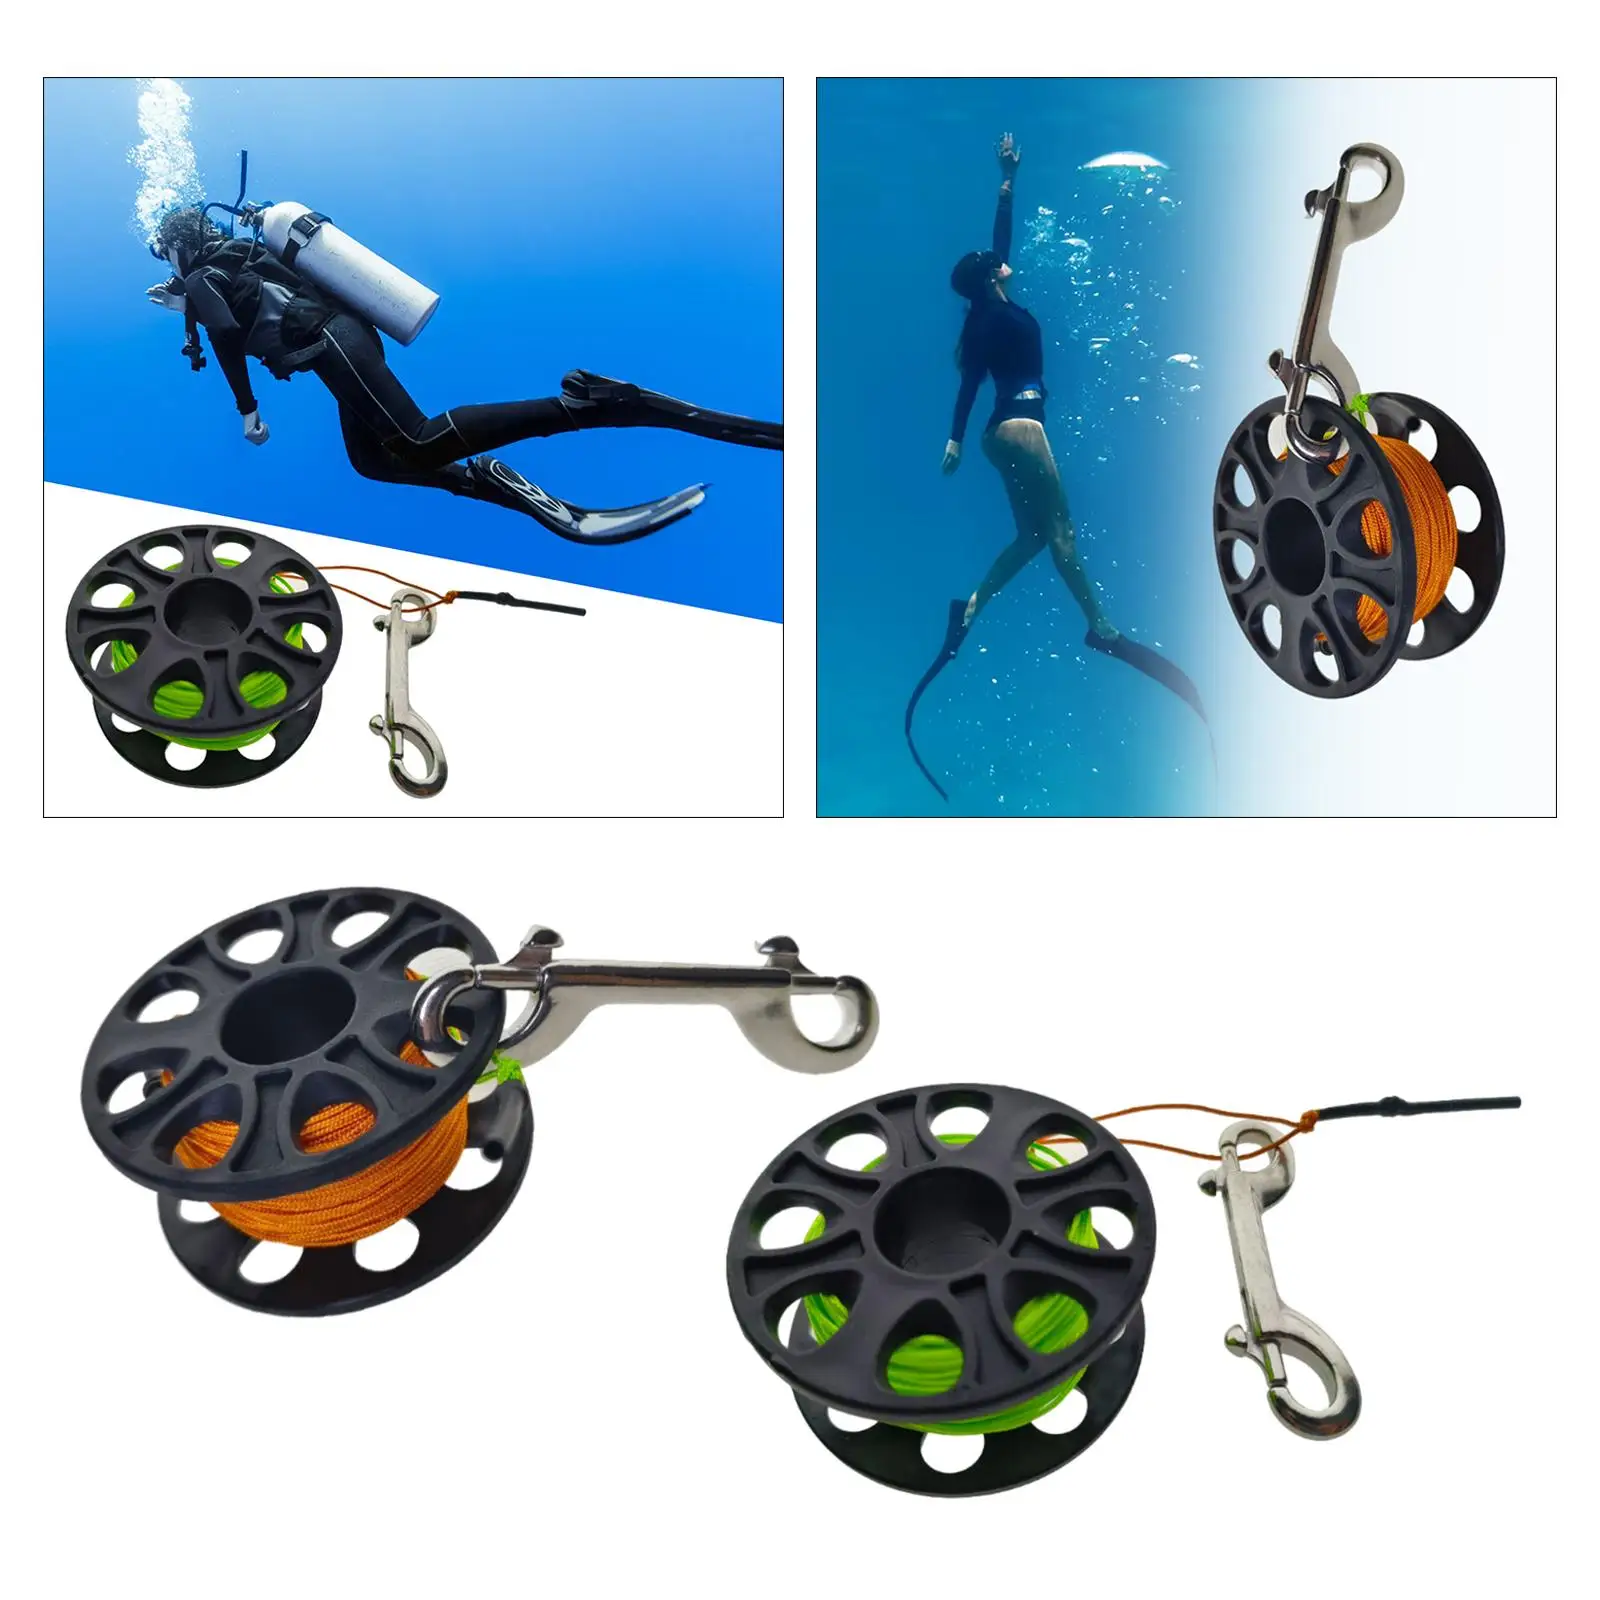 Dive Reel Finger Spool for Scuba Diving, Snorkeling, Spearfishing, Cave